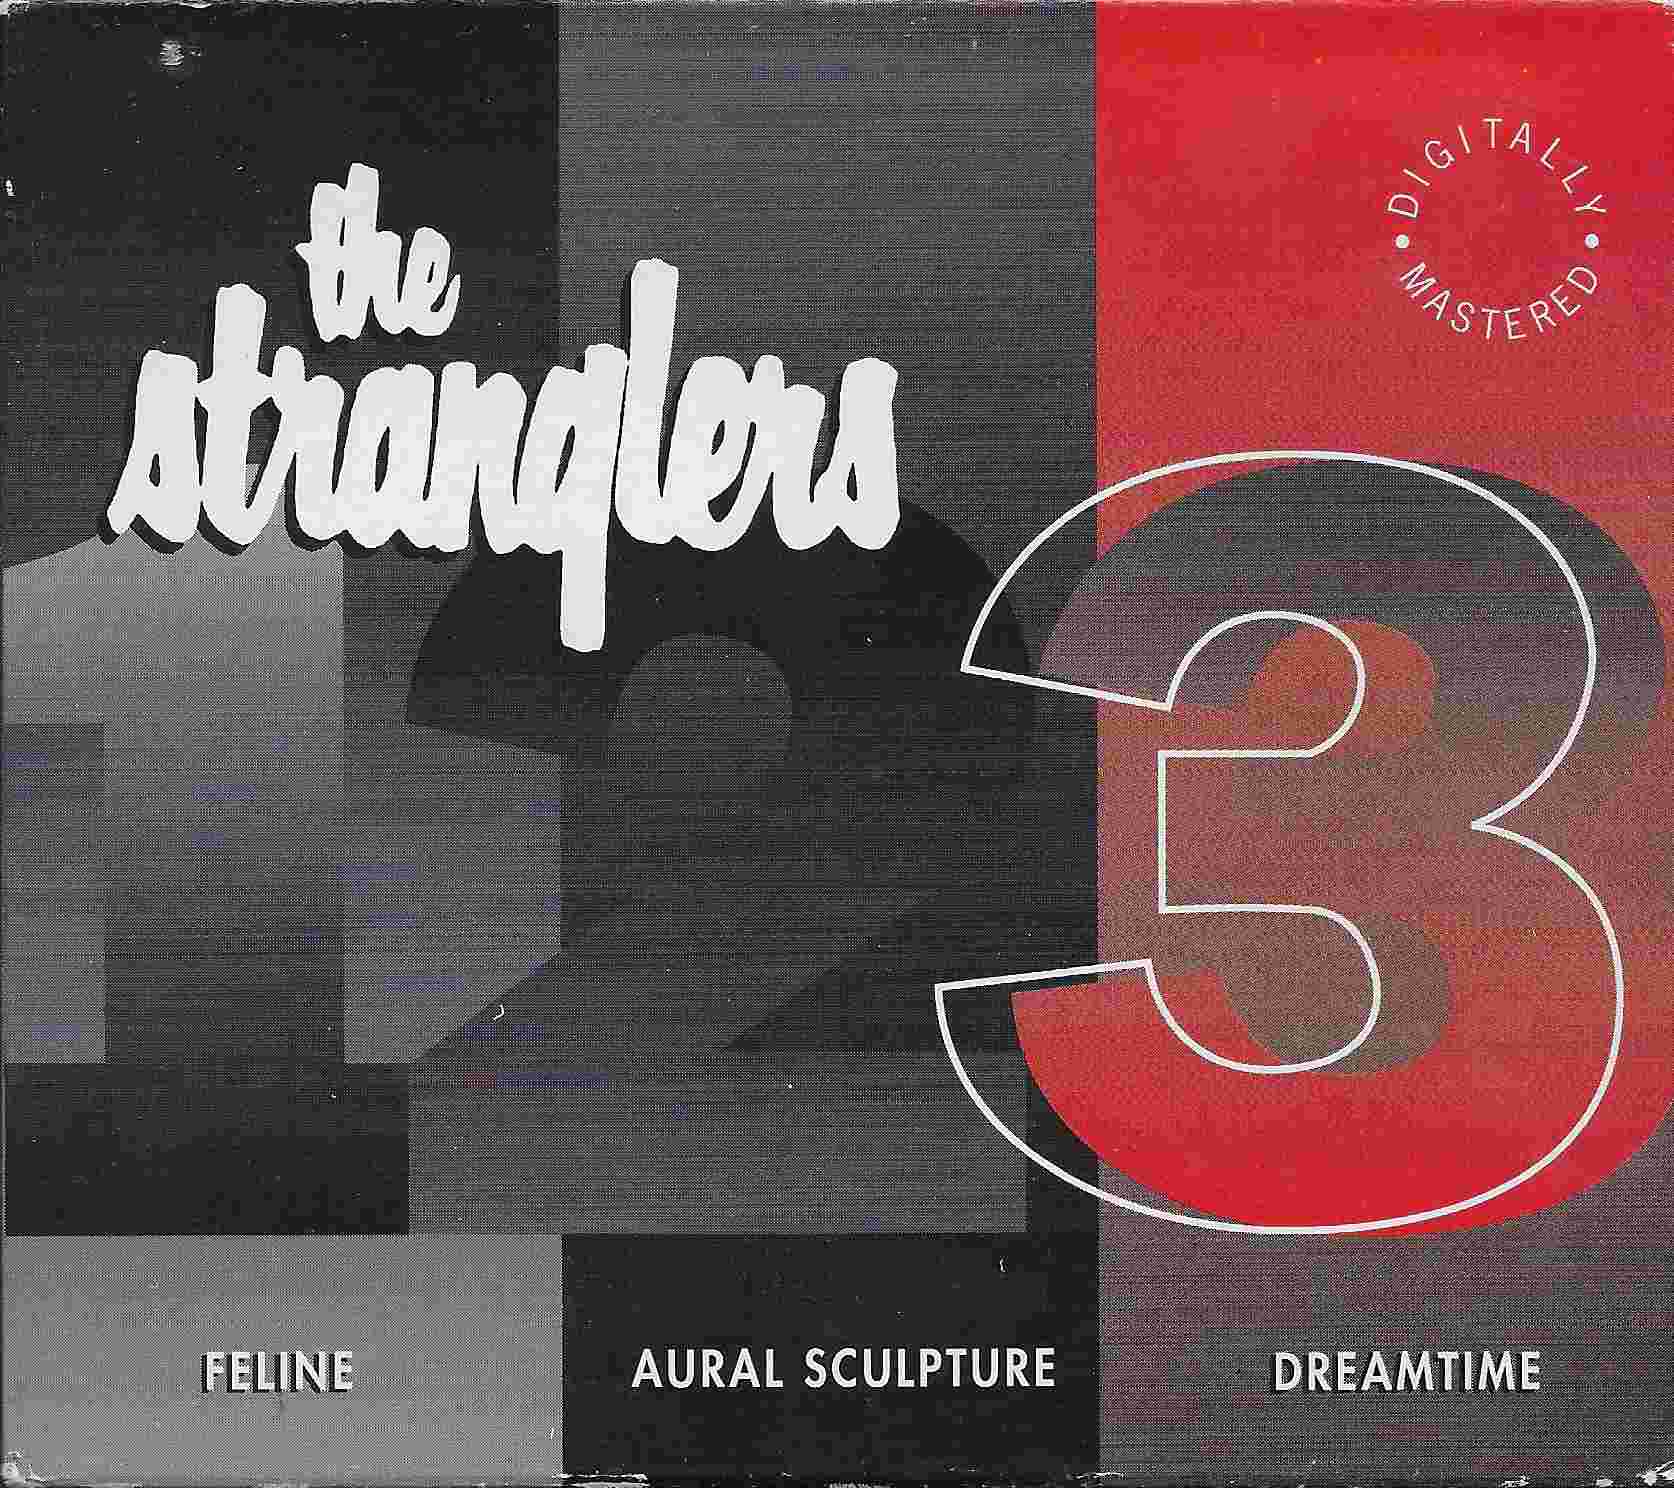 Picture of 467395 2 Feline / Aural sculpture / Dreamtime by artist The Stranglers